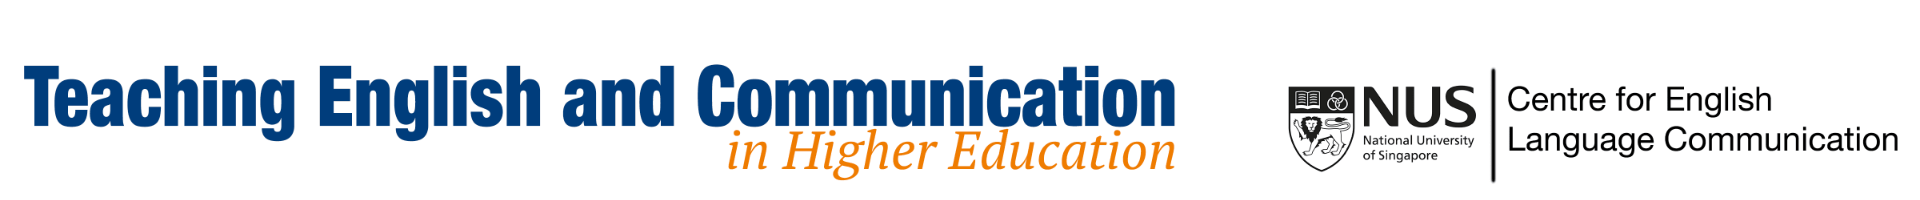 NUS CELC: Teaching English and Communication in Higher Education